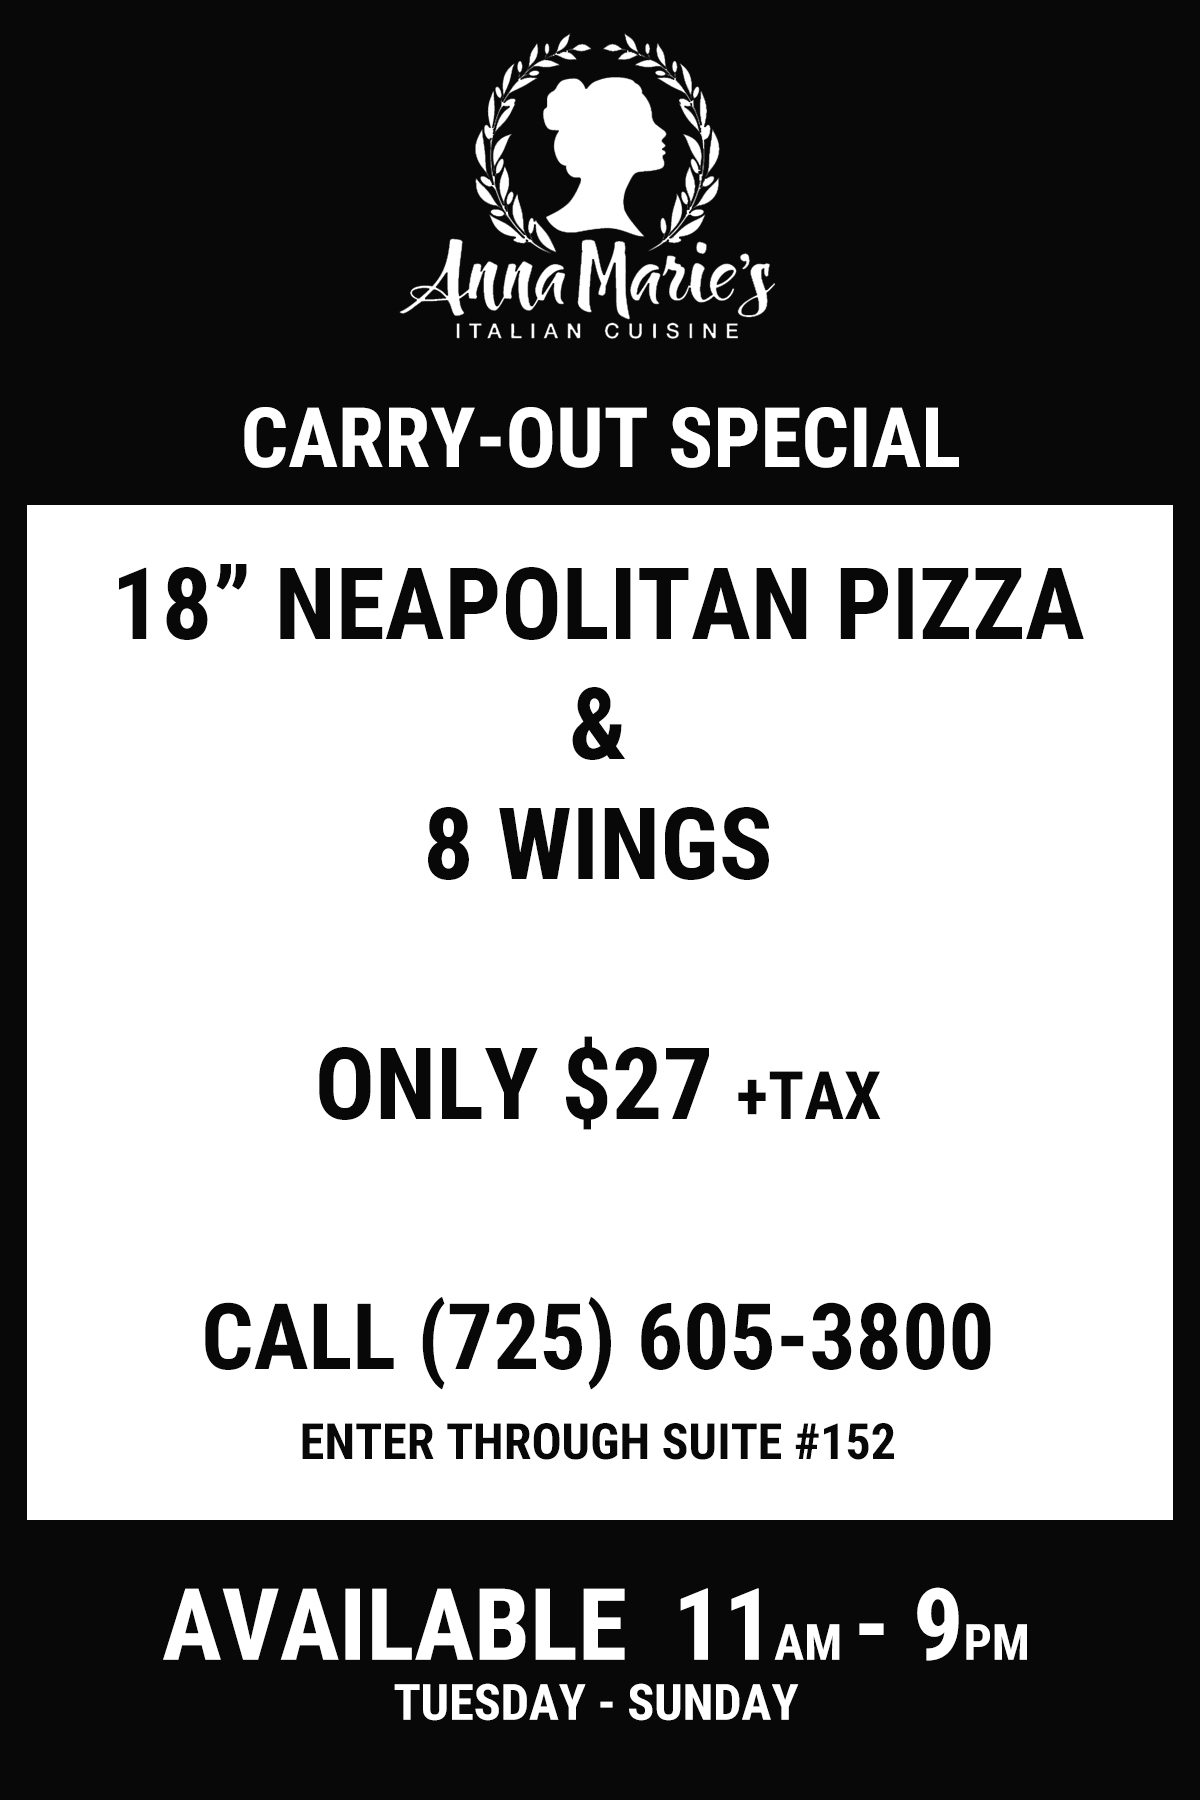 Carry-Out Special $27